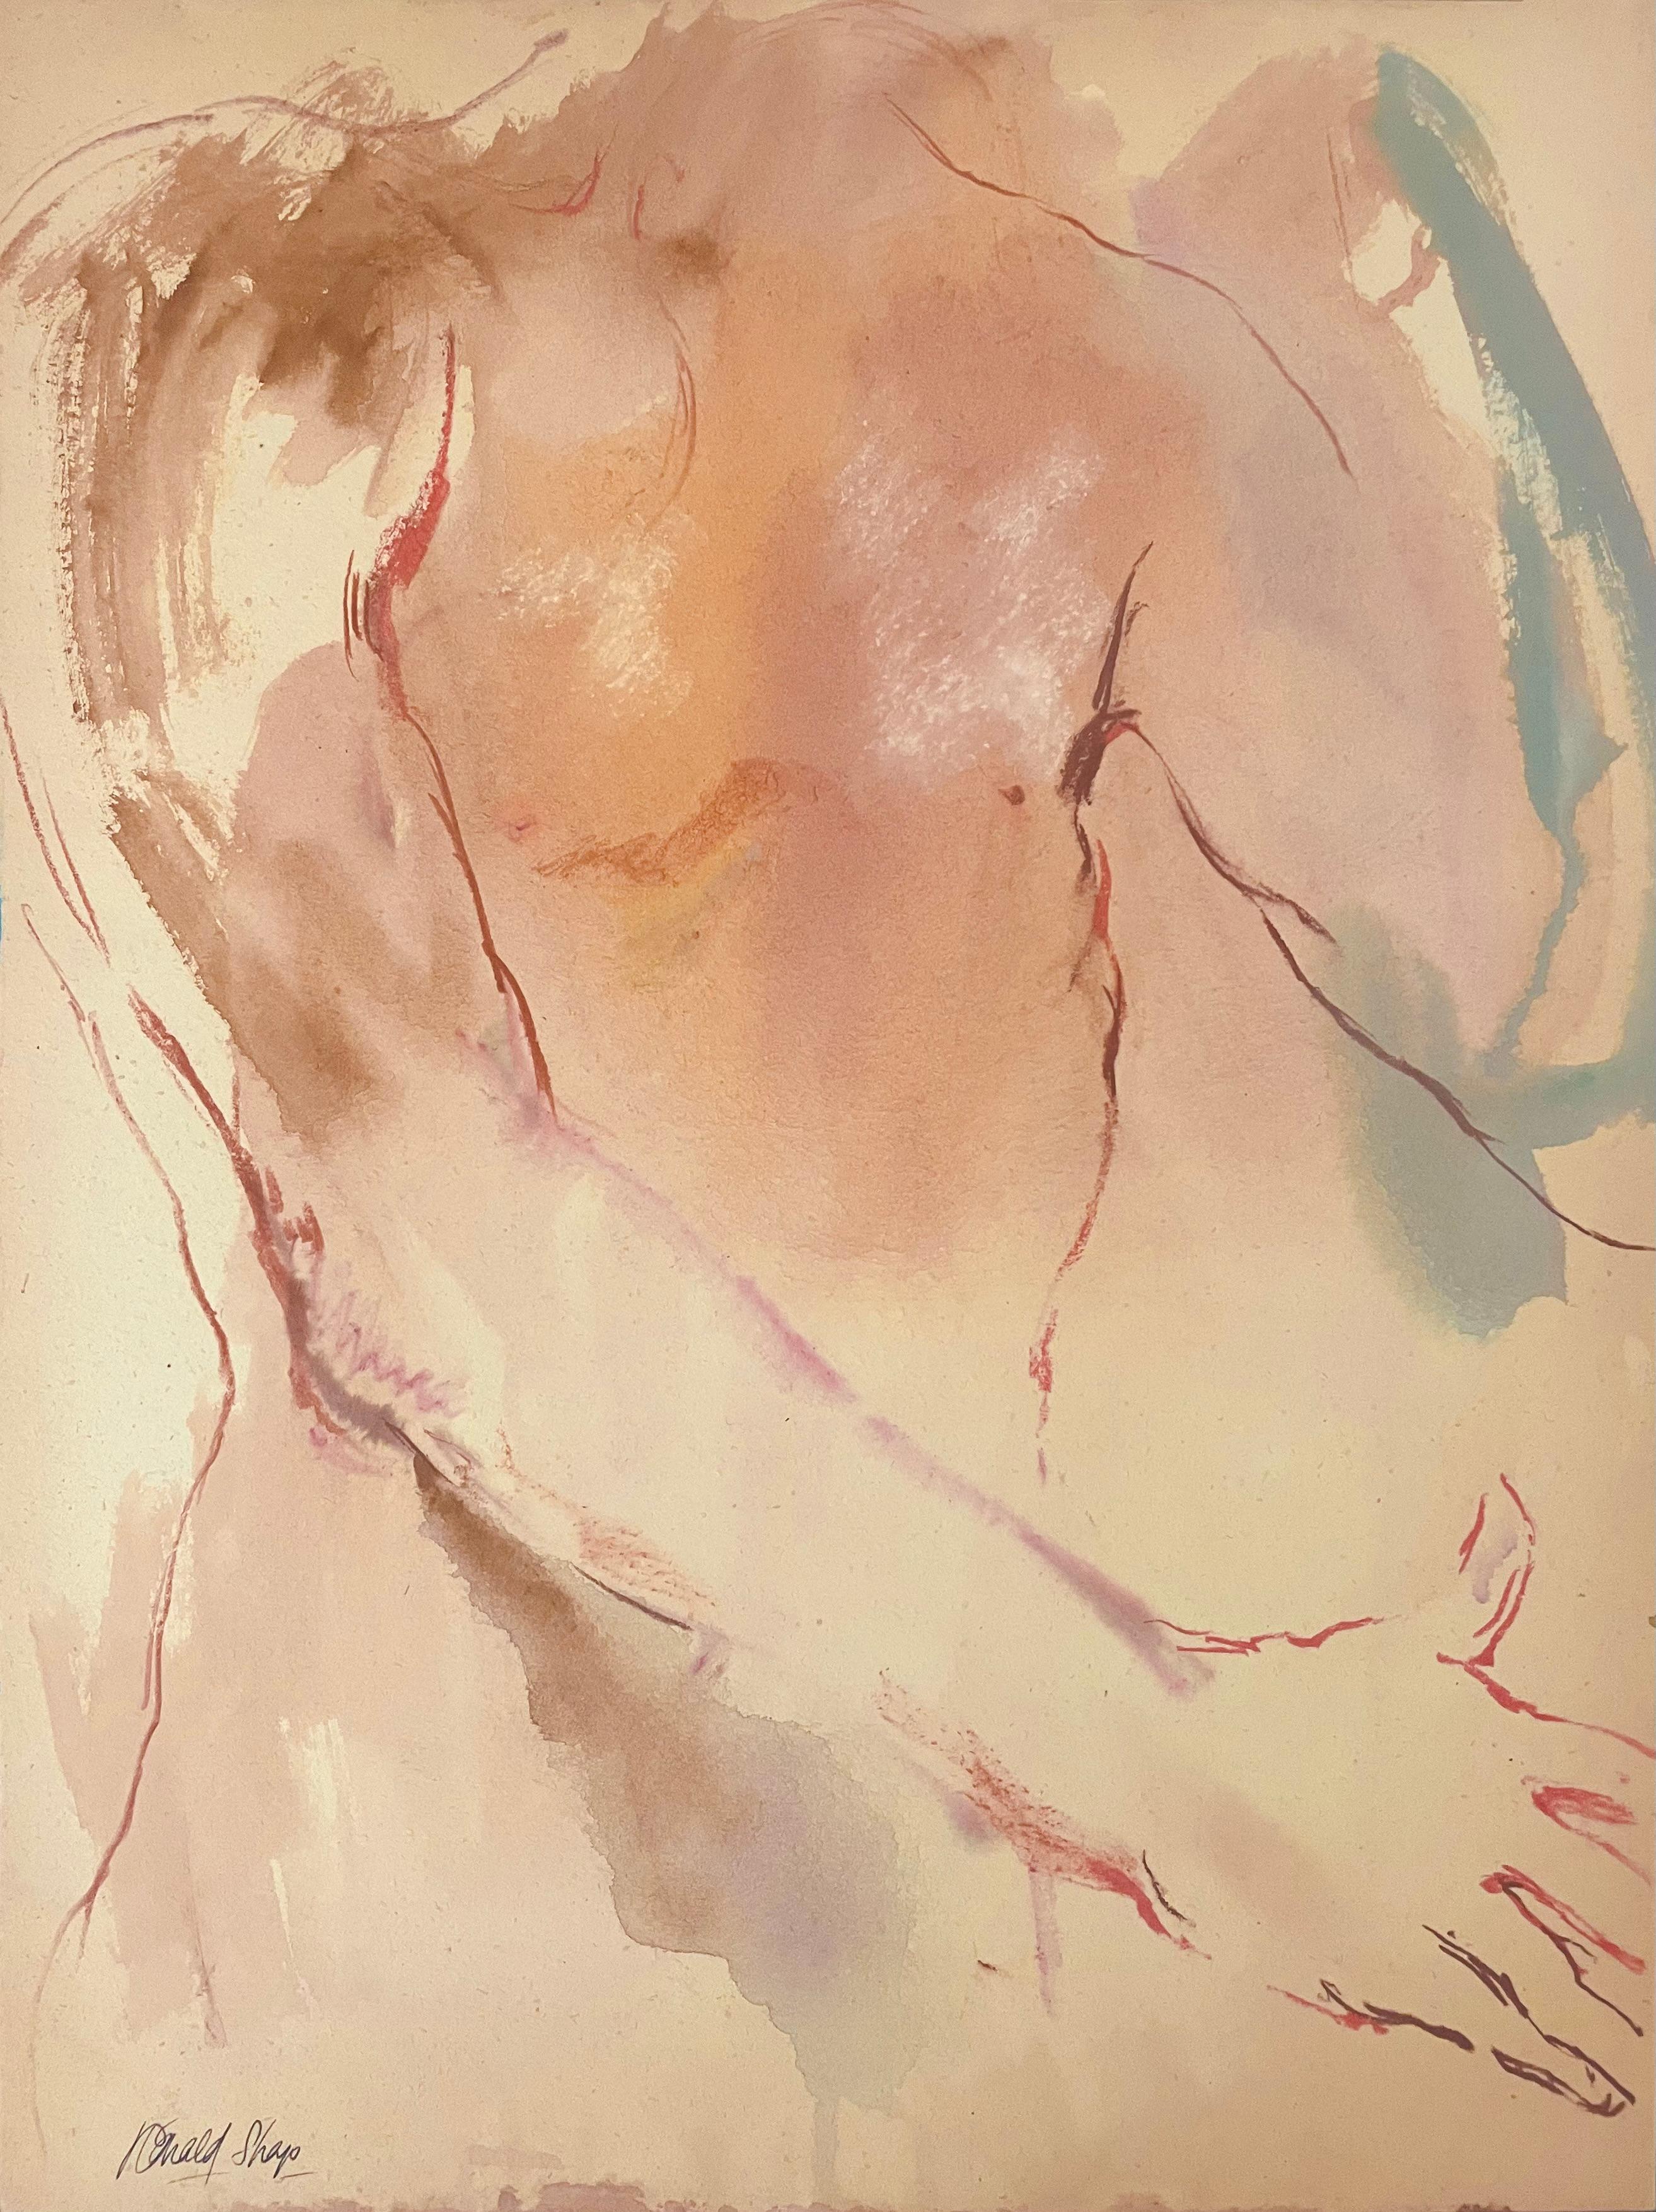 Original oil pastel and gouache figure drawing by celebrated, twentieth-century California landscape painter, Ronald Shap. Sketch of a nude male torso with washes of light aqua/sage green and accents of neon pink oil pastel. This is a part of Shap's